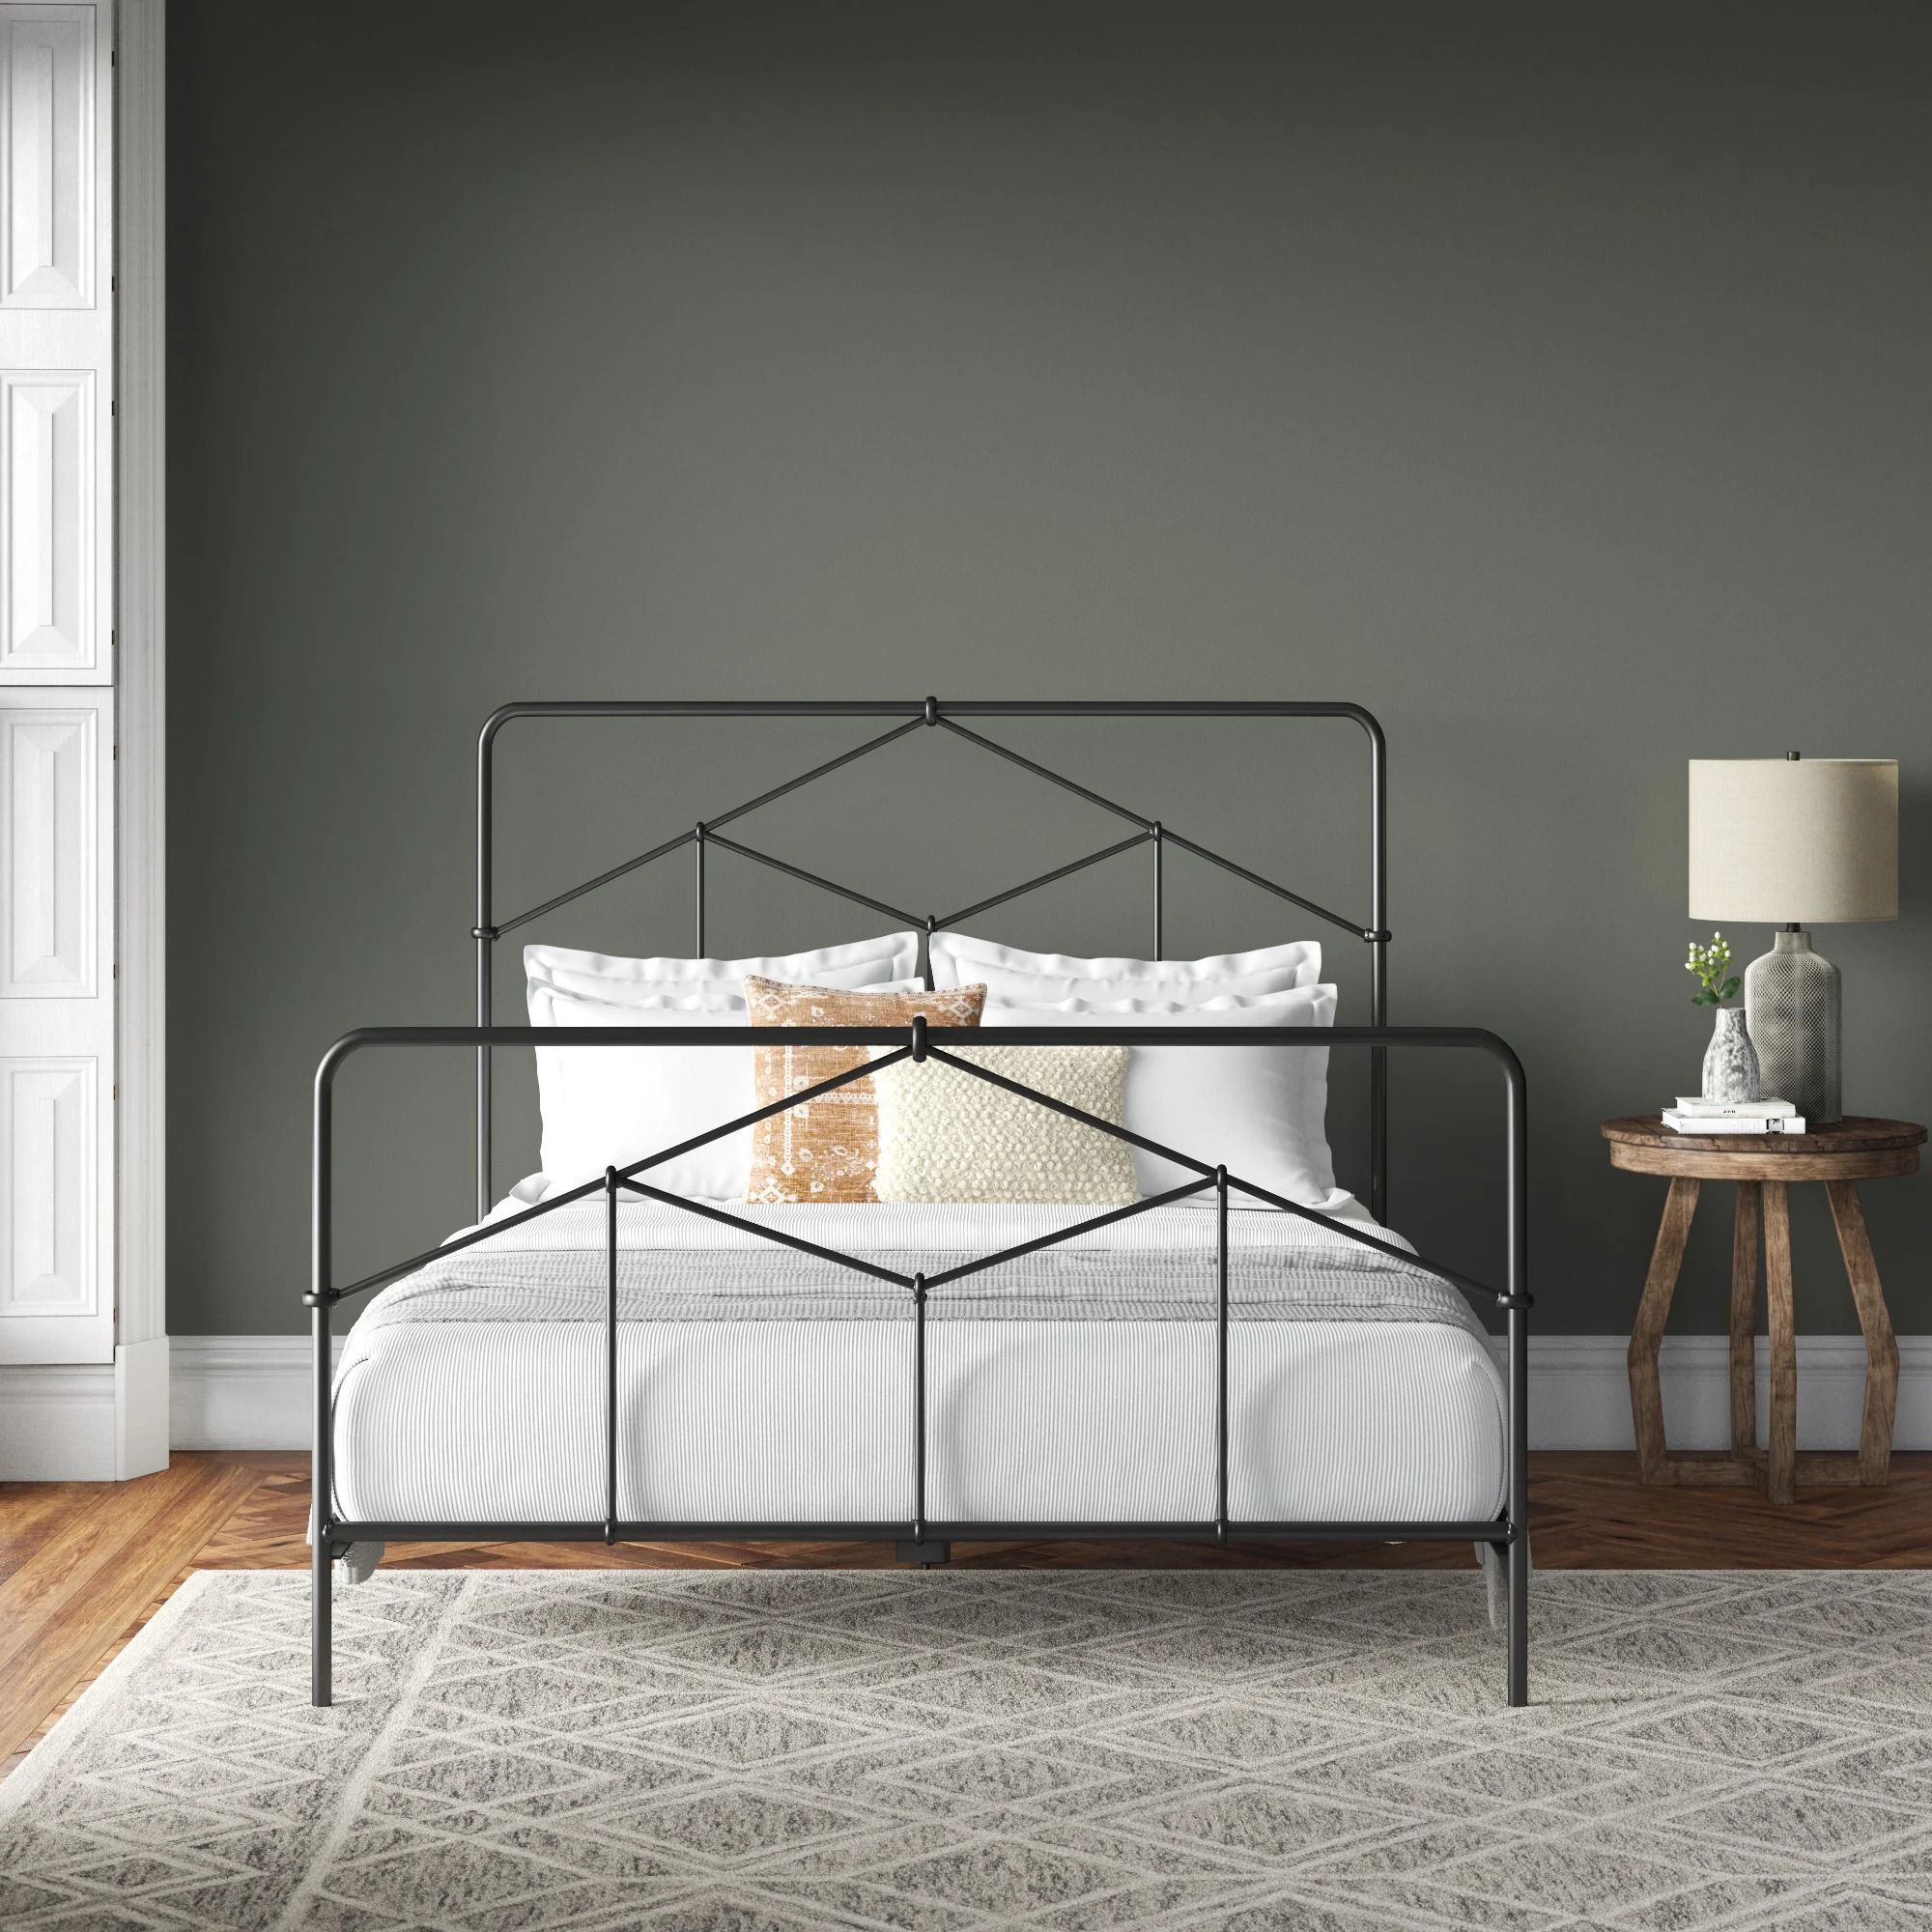 10 Best Box Spring Bed Frames Beds, Bed Frame For Boxspring And Mattress